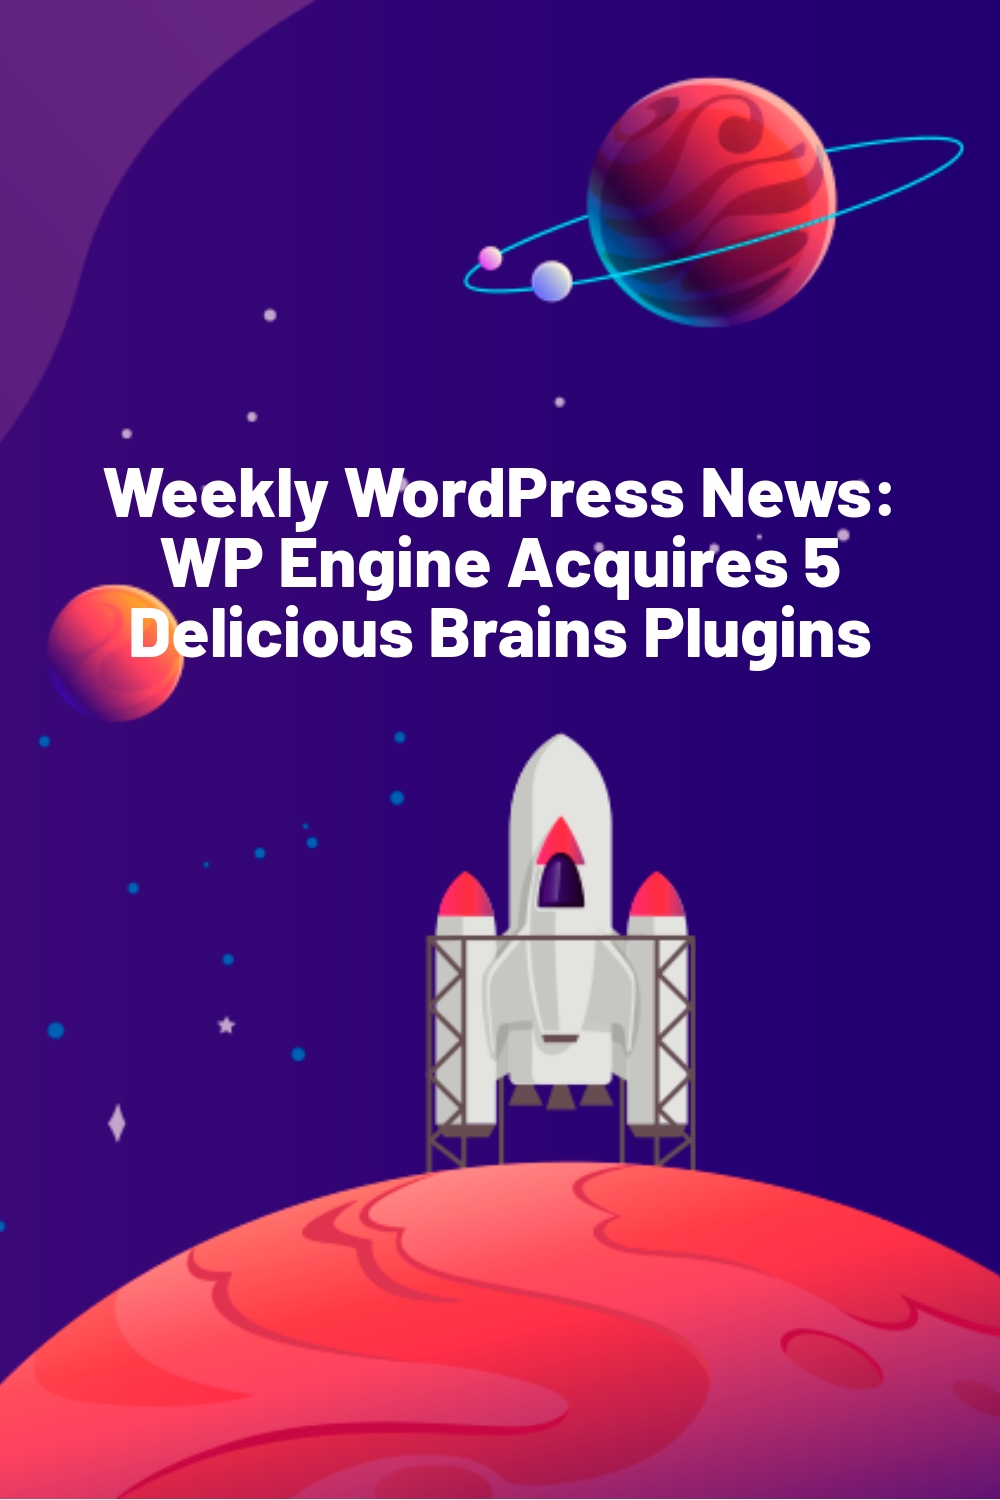 Weekly WordPress News: WP Engine Acquires 5 Delicious Brains Plugins